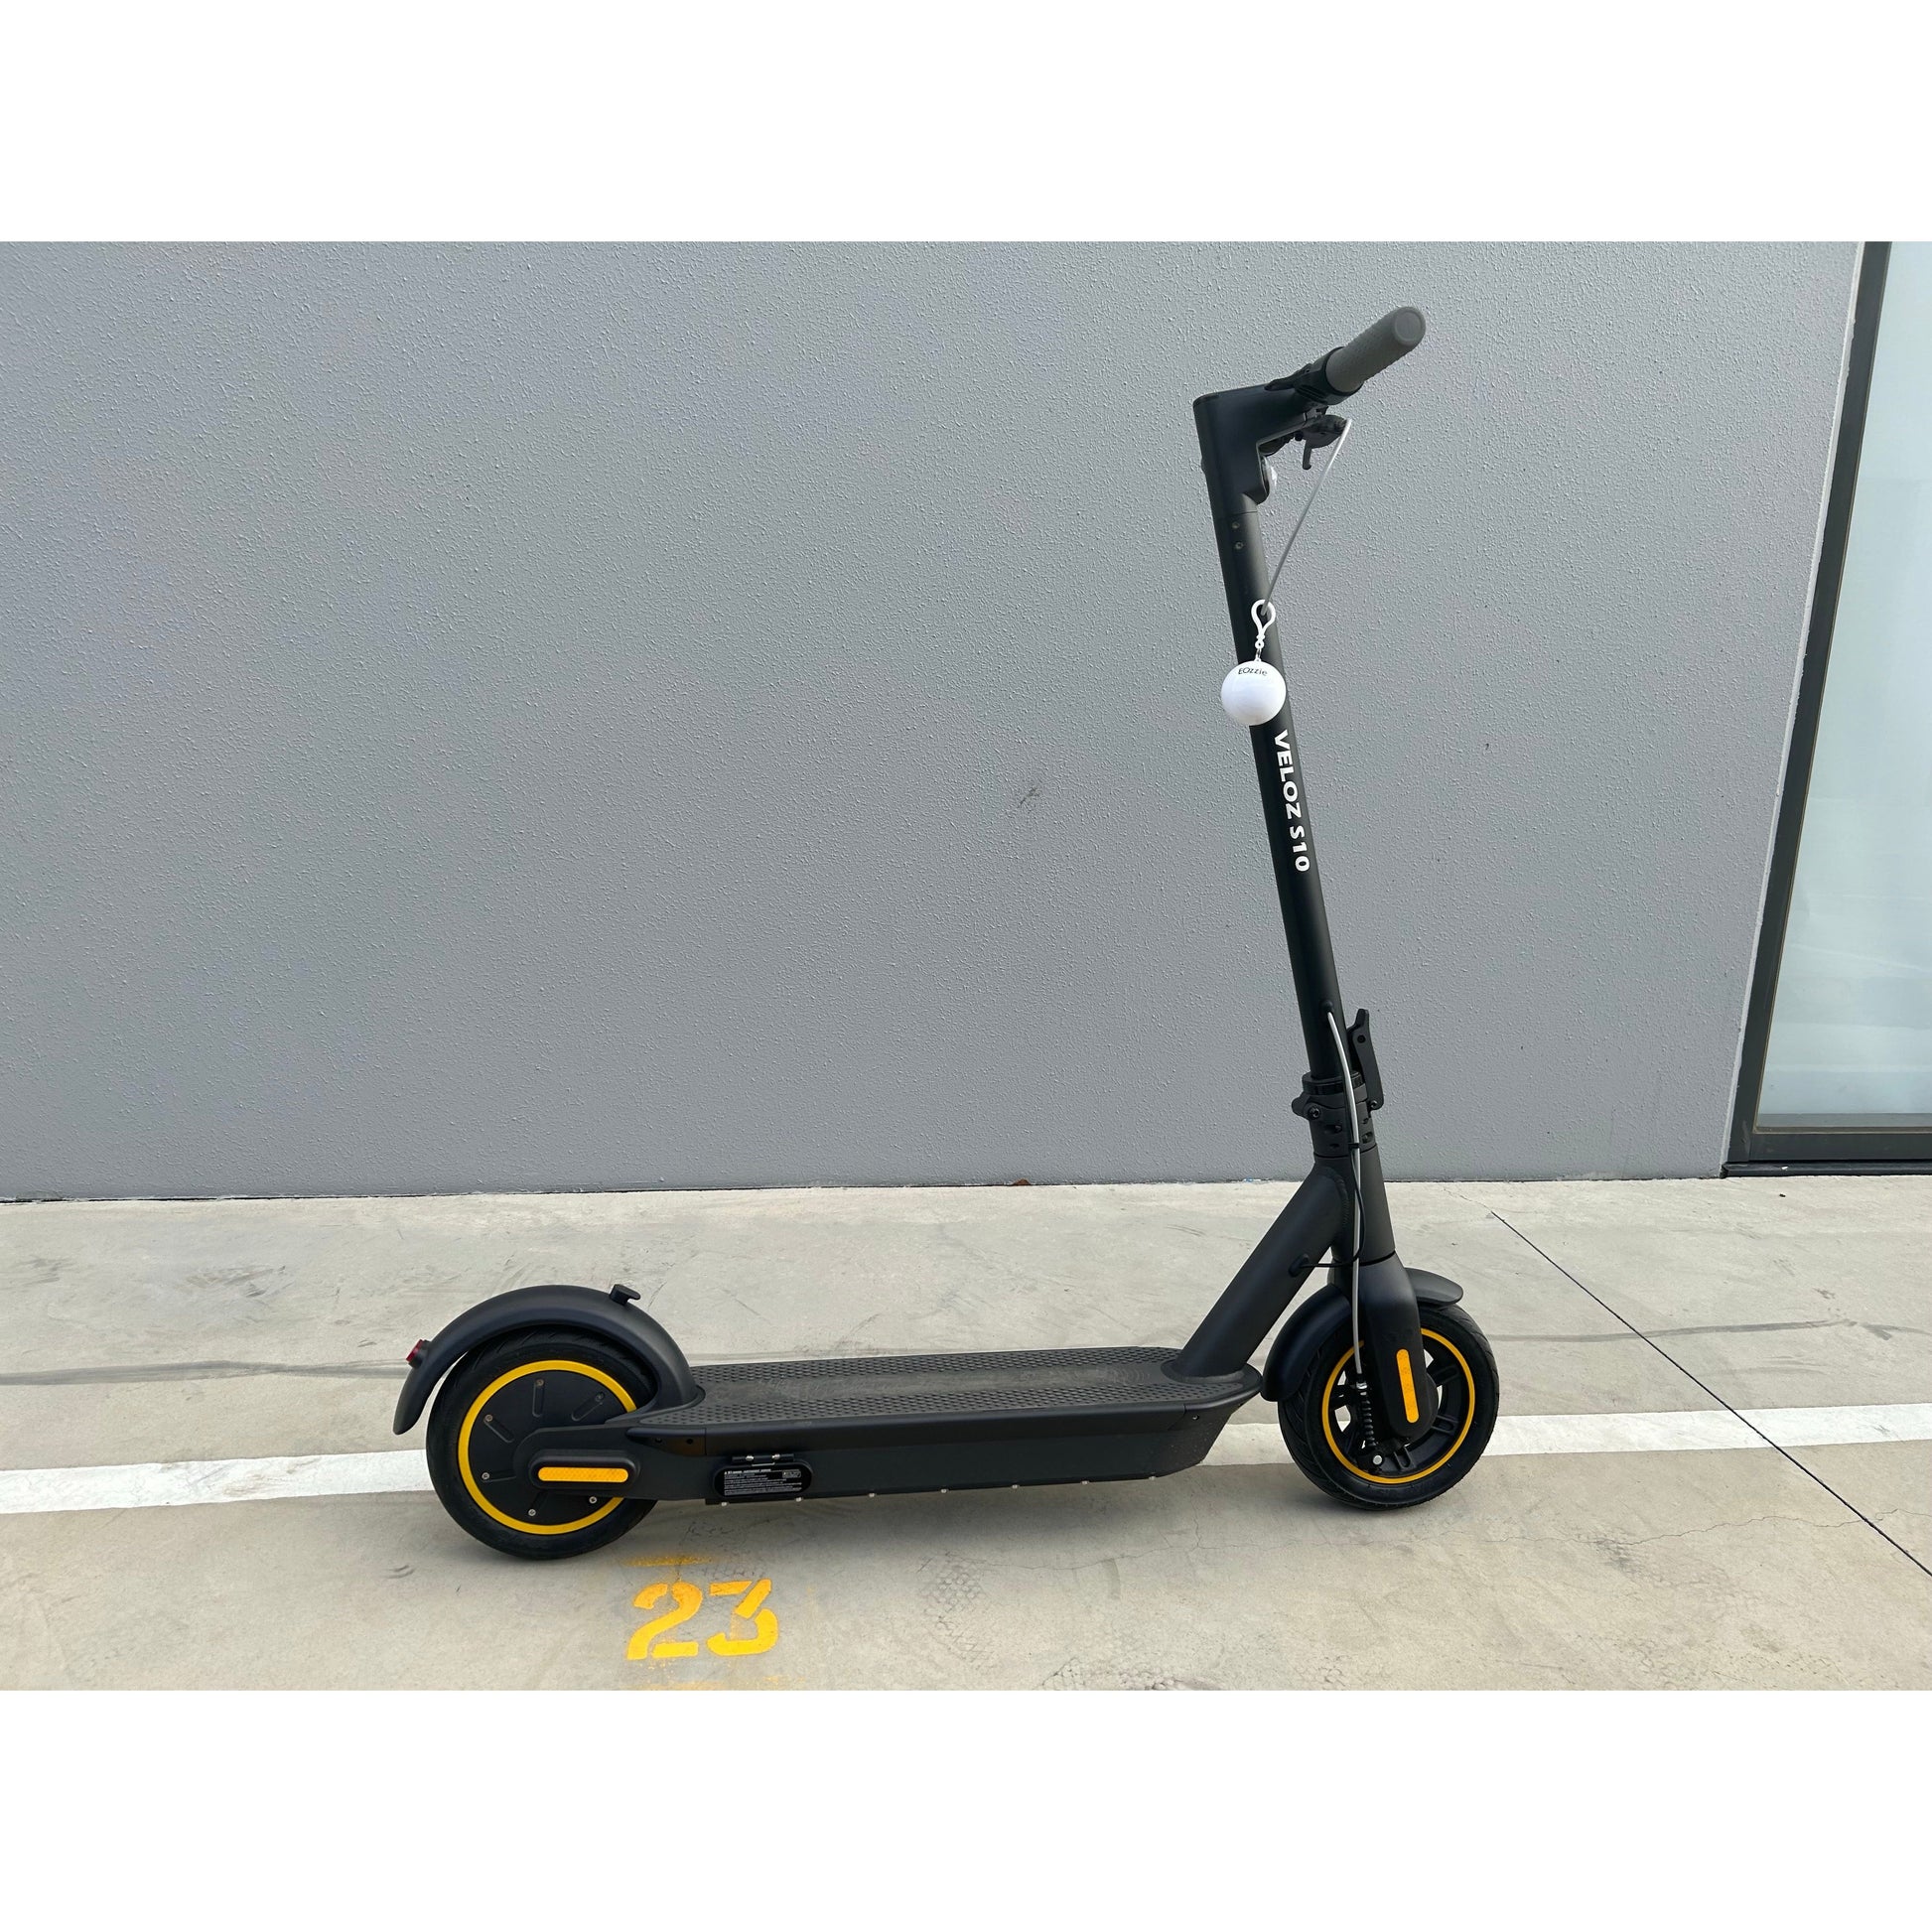 Veloz S10 Electric Scooter 500W Motor 65 Km Autonomy 6 months Free Service - EOzzie Electric Vehicles